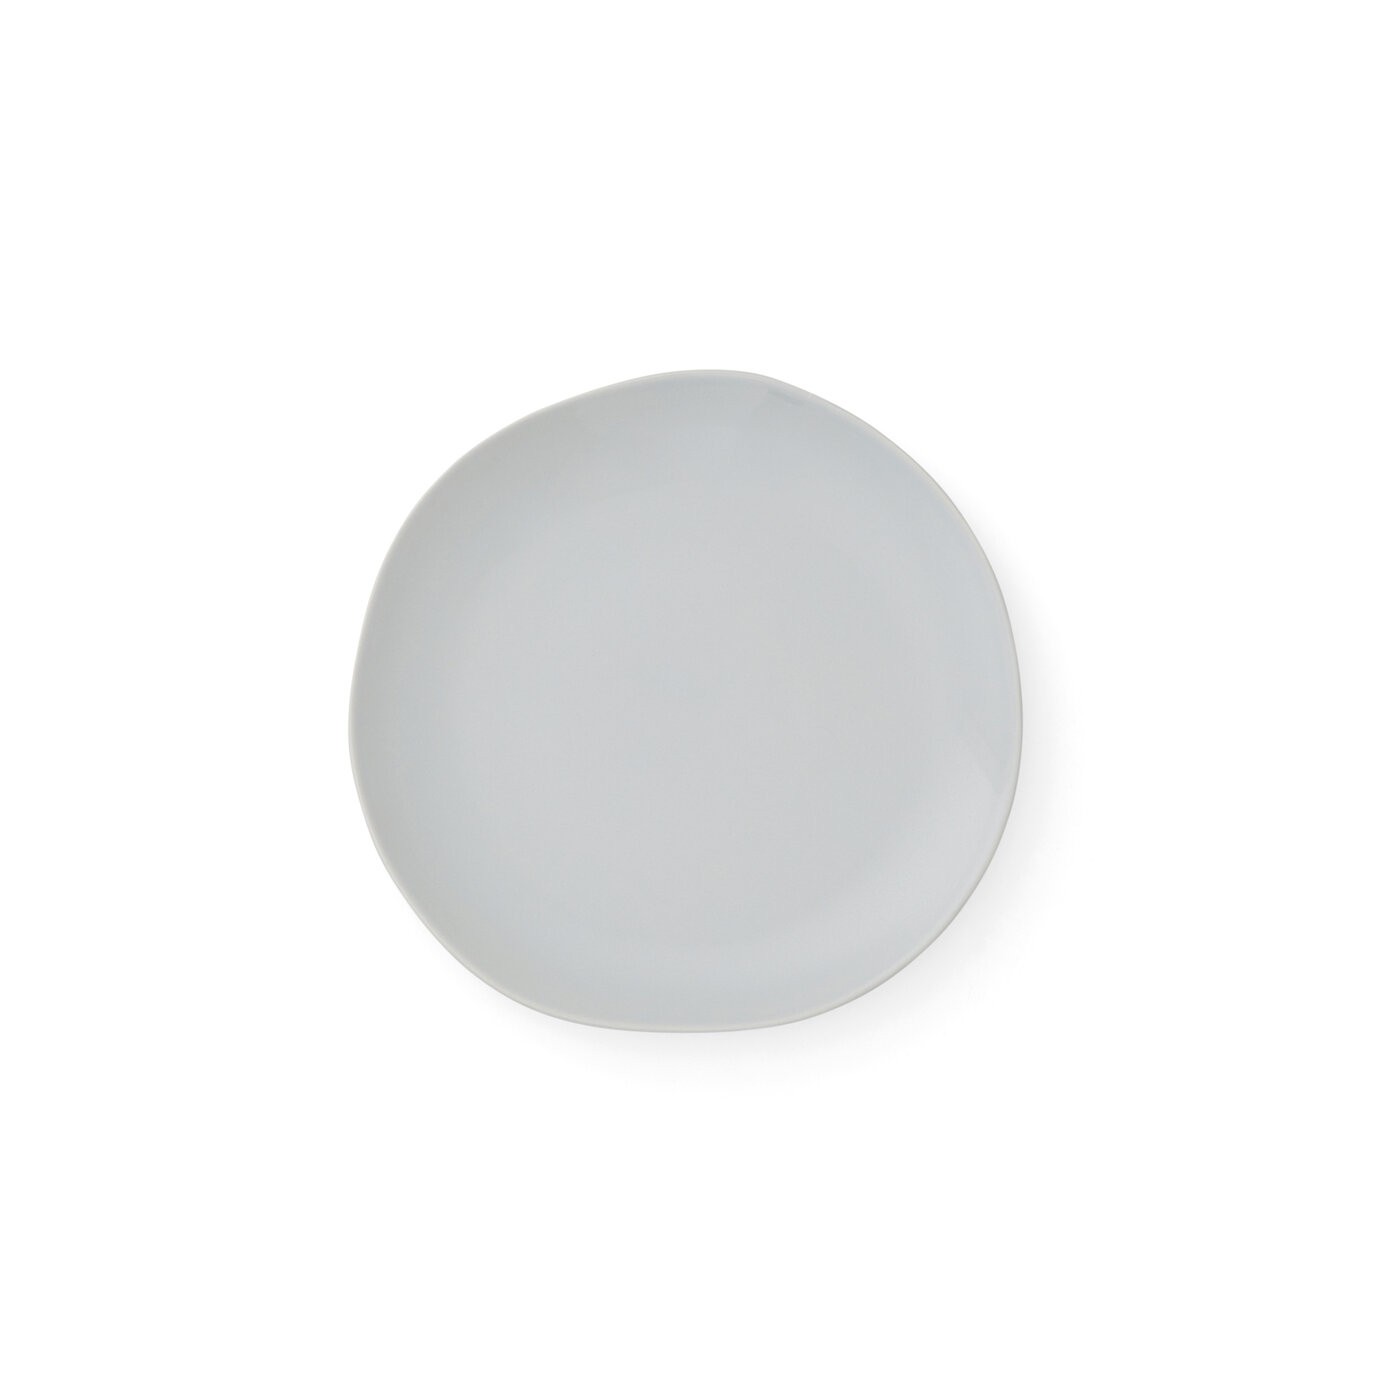 Buy the Sophie Conran for Portmeirion Arbor Salad Plate Set of 4 Dove Grey online at smithsofloughton.com